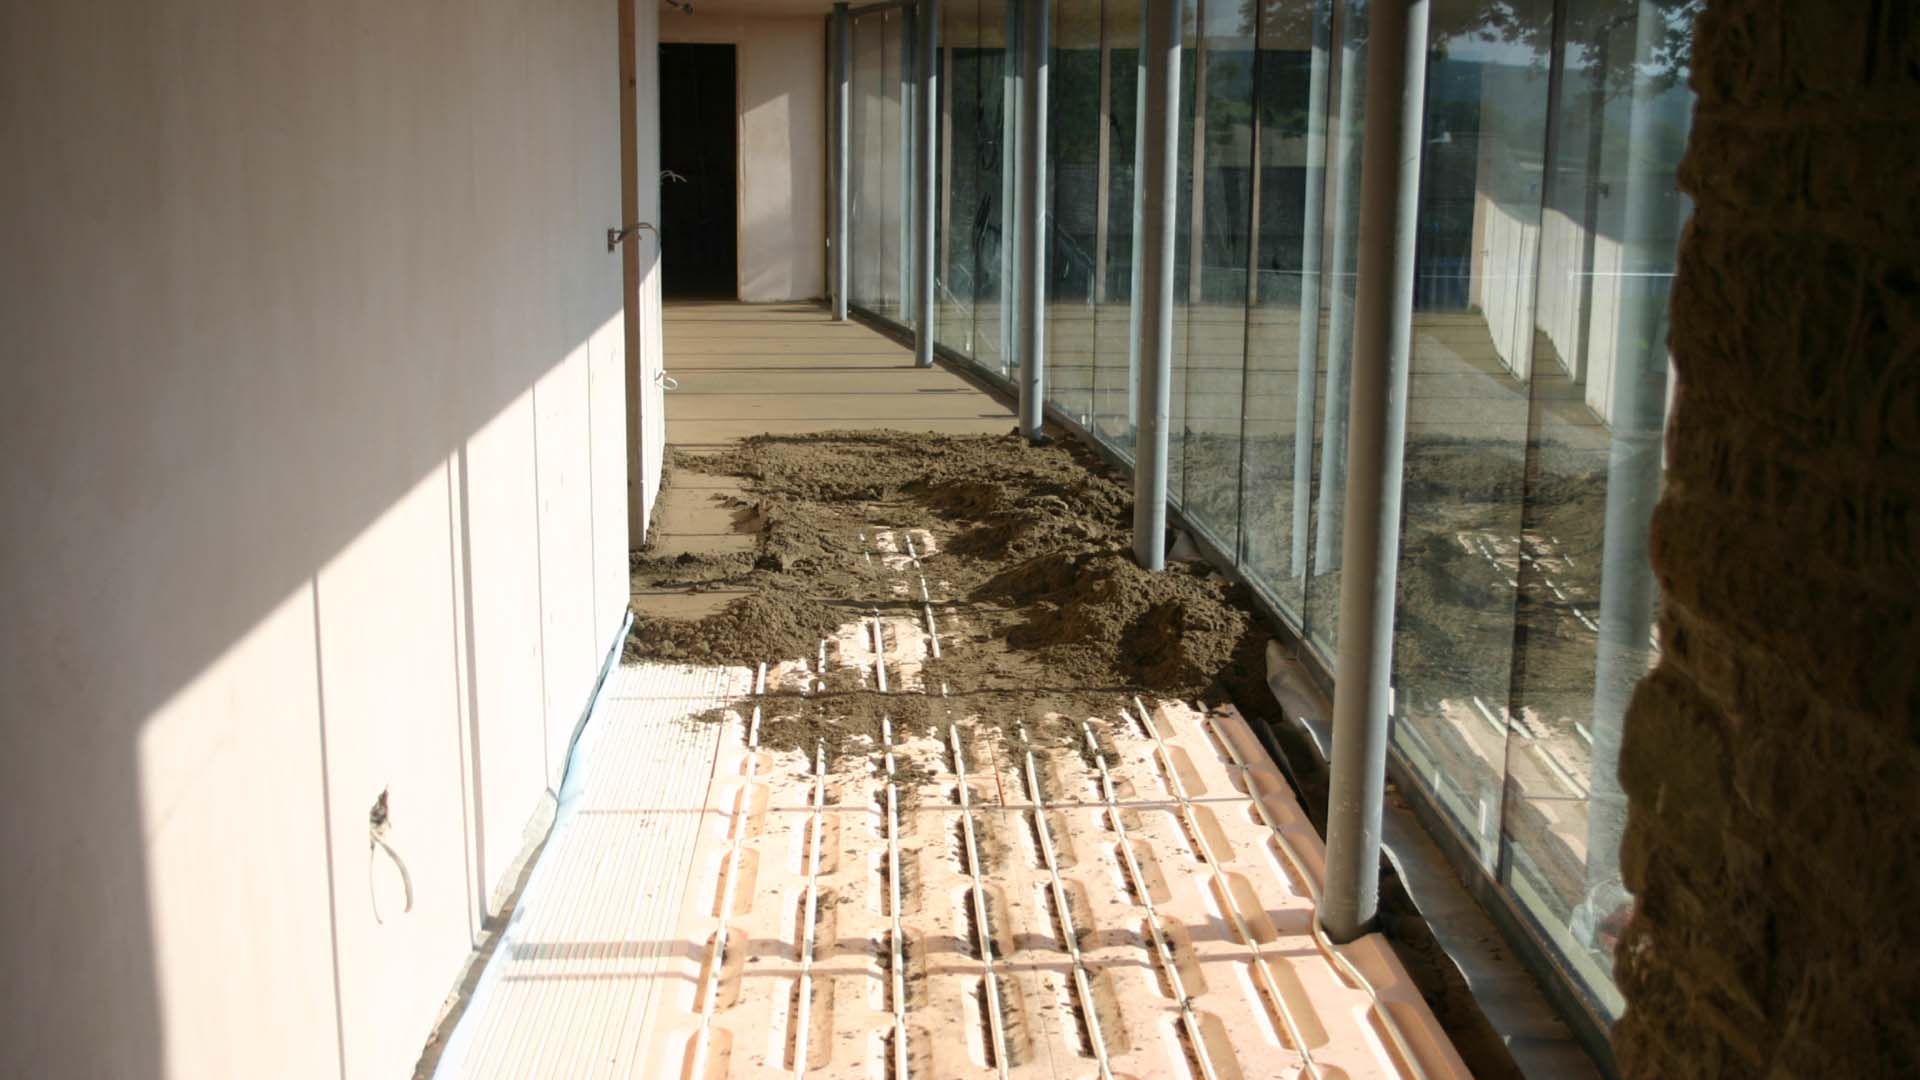 A corridor in the process of being screed